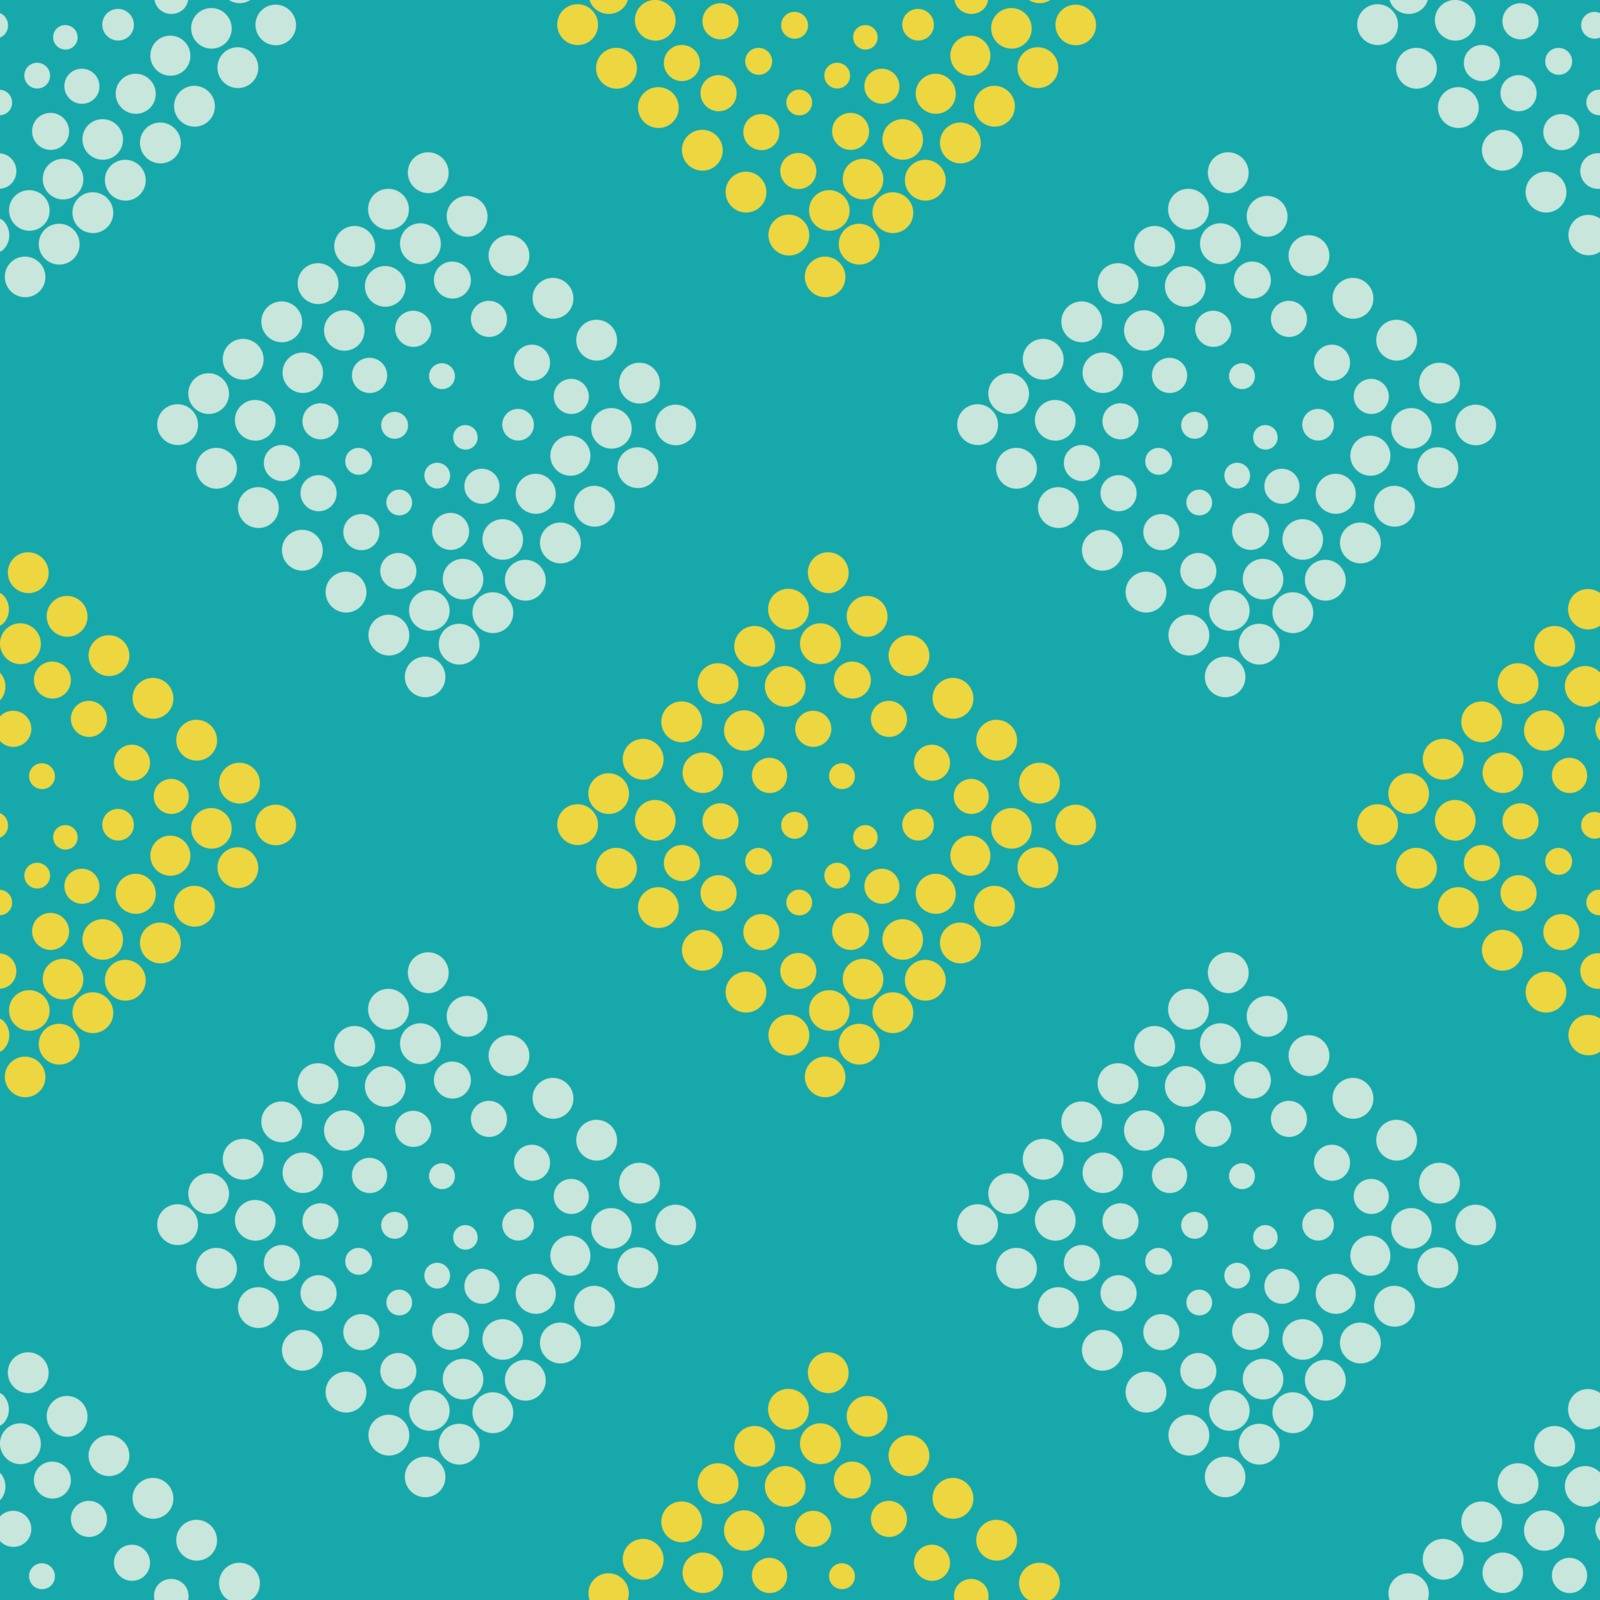 Vector geometric seamless pattern. Repeating abstract square gradation in turquoise, blue, yellow color. Modern halftone design, pointillism, illusion